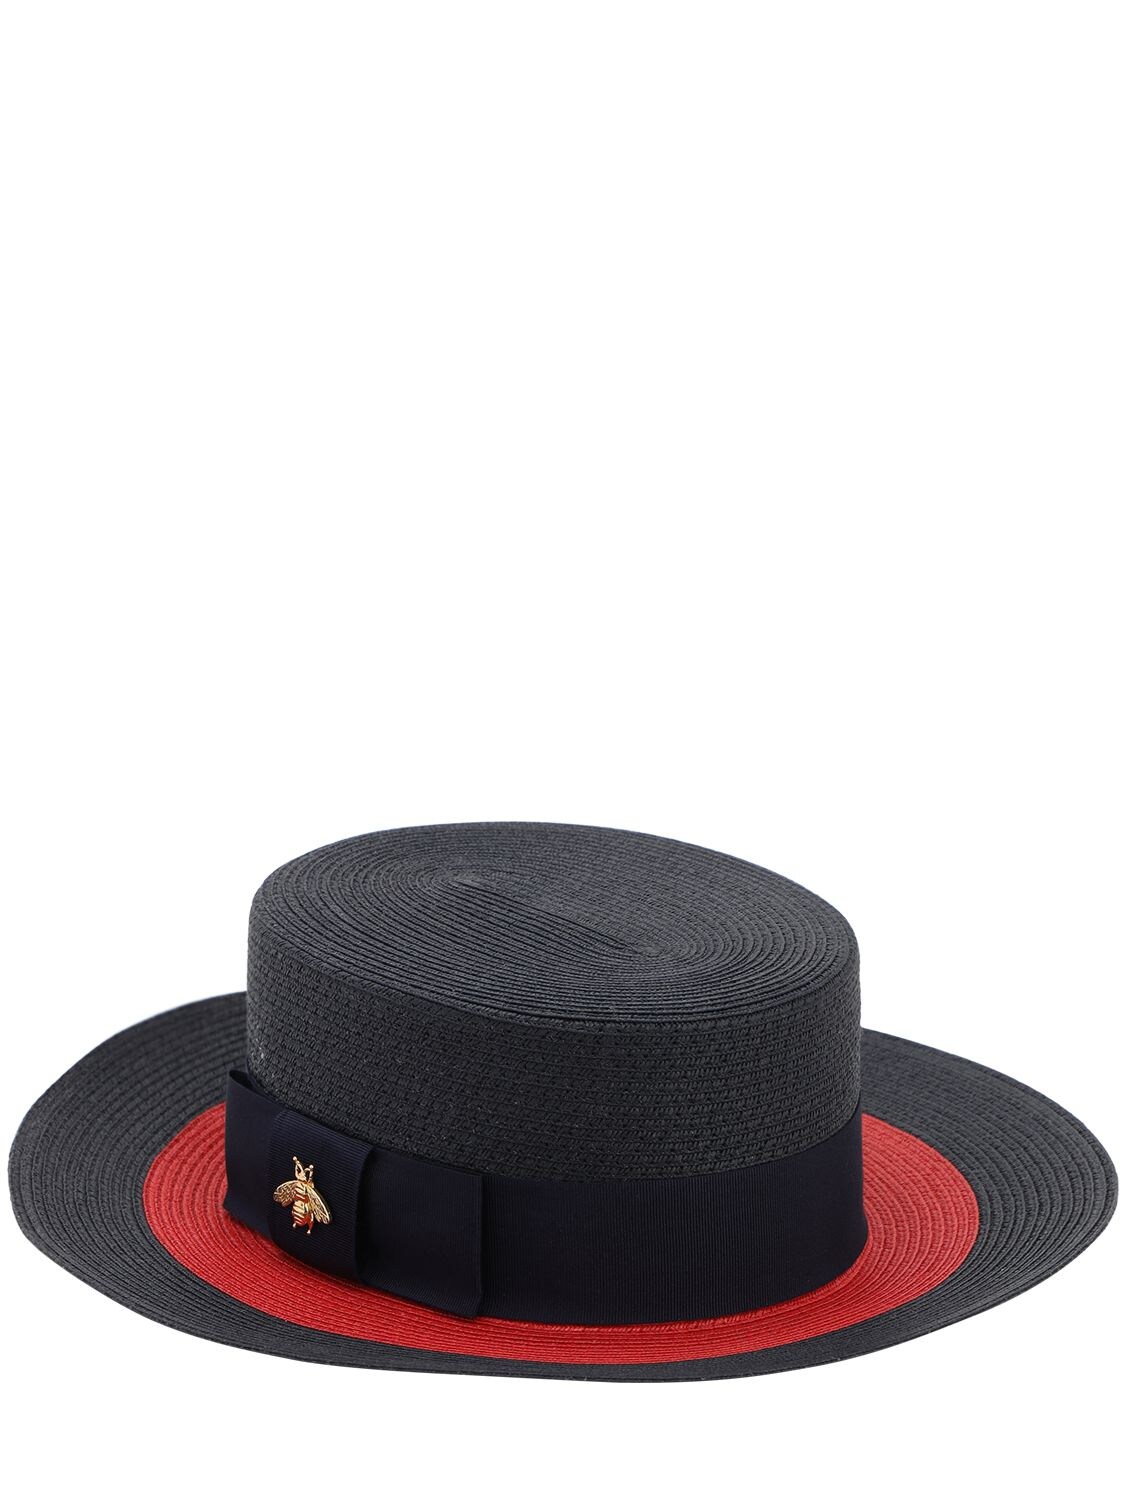 Gucci Babies' Straw Effect Hat In Navy